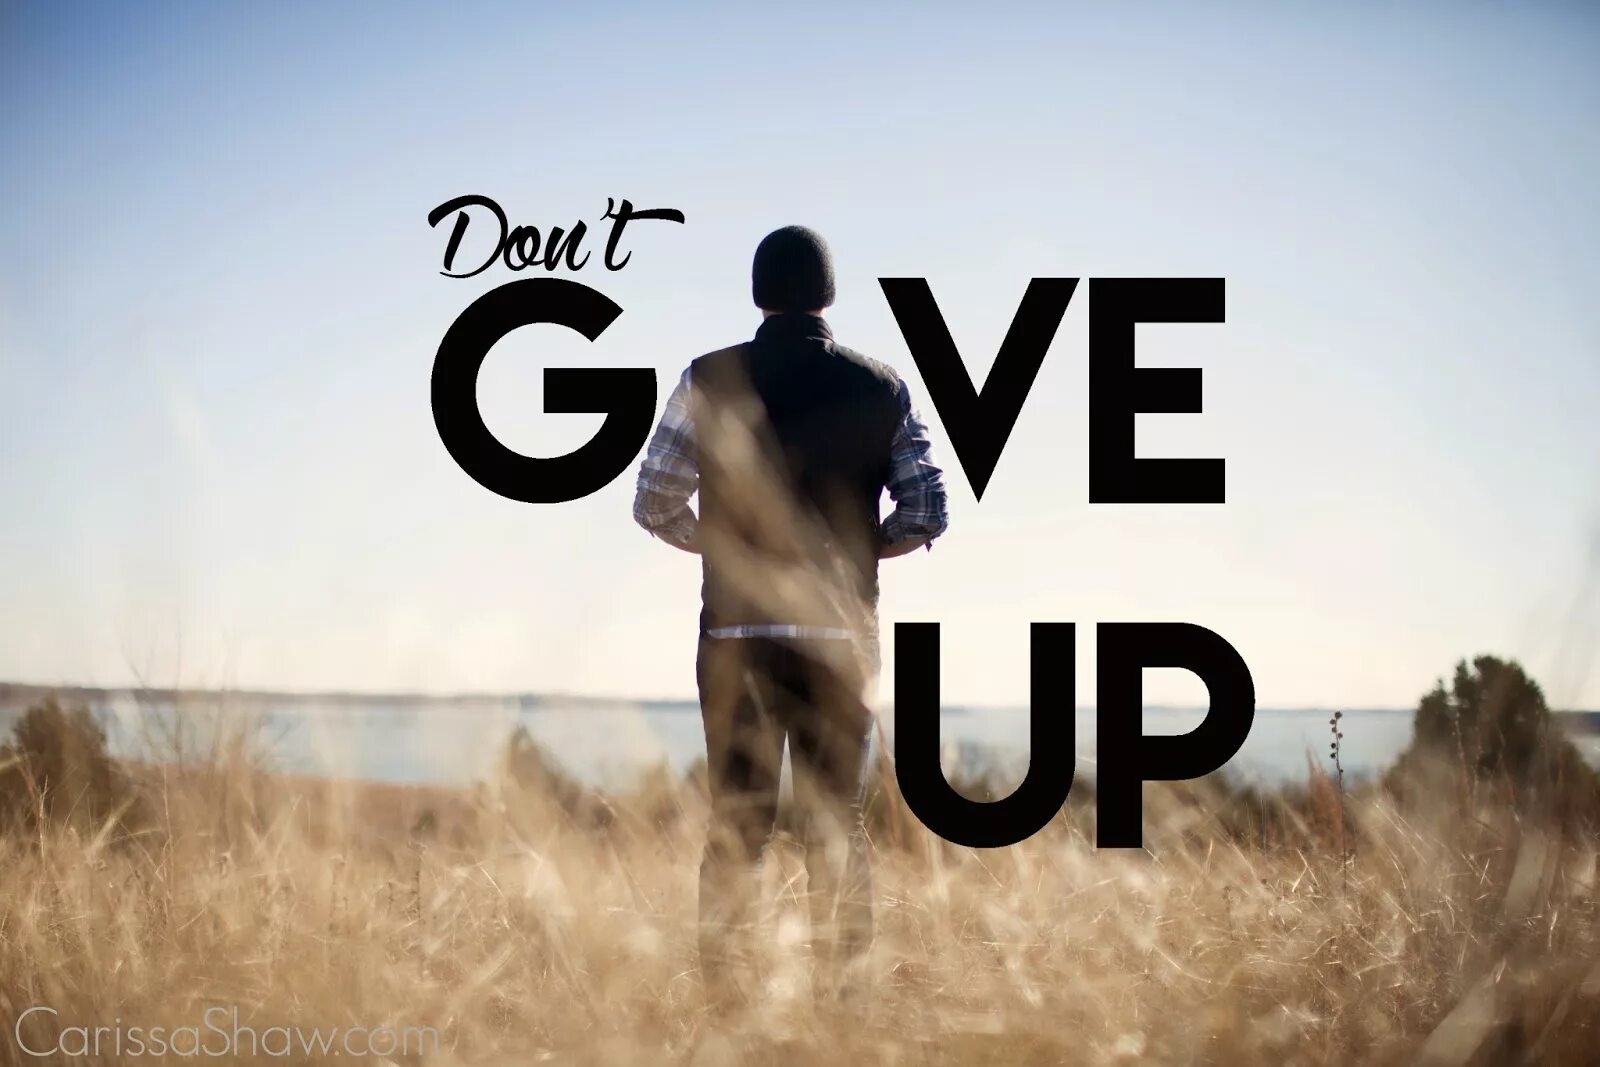 Stay go life. Don't give up картинка. Надпись don't give up. Never give up. Never give up картинки.